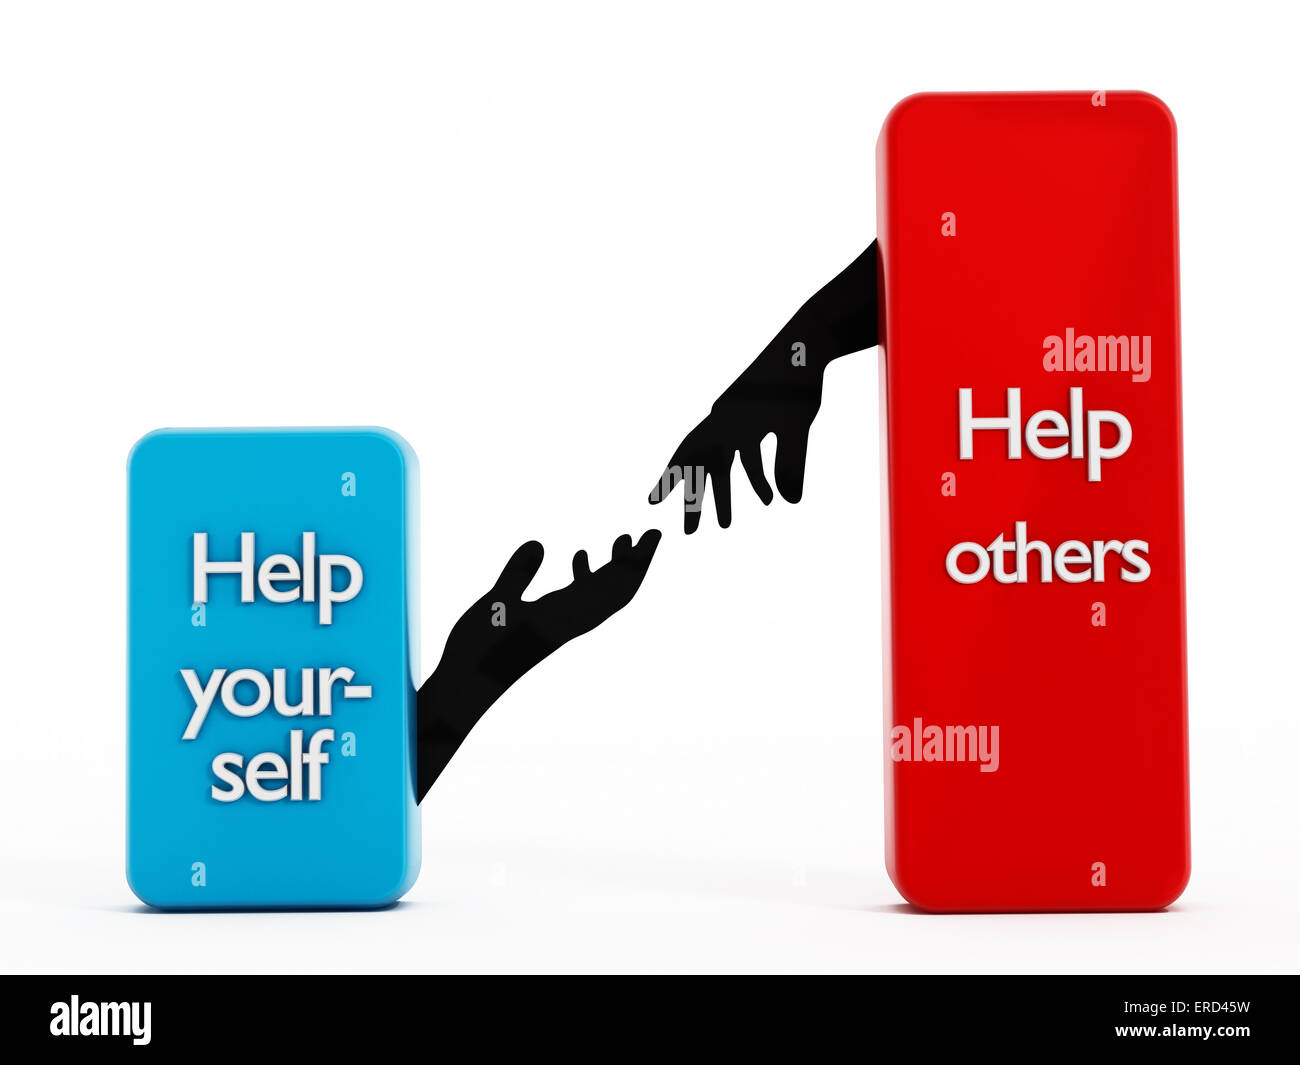 Help yourself help others texts on rectangle shapes. Stock Photo